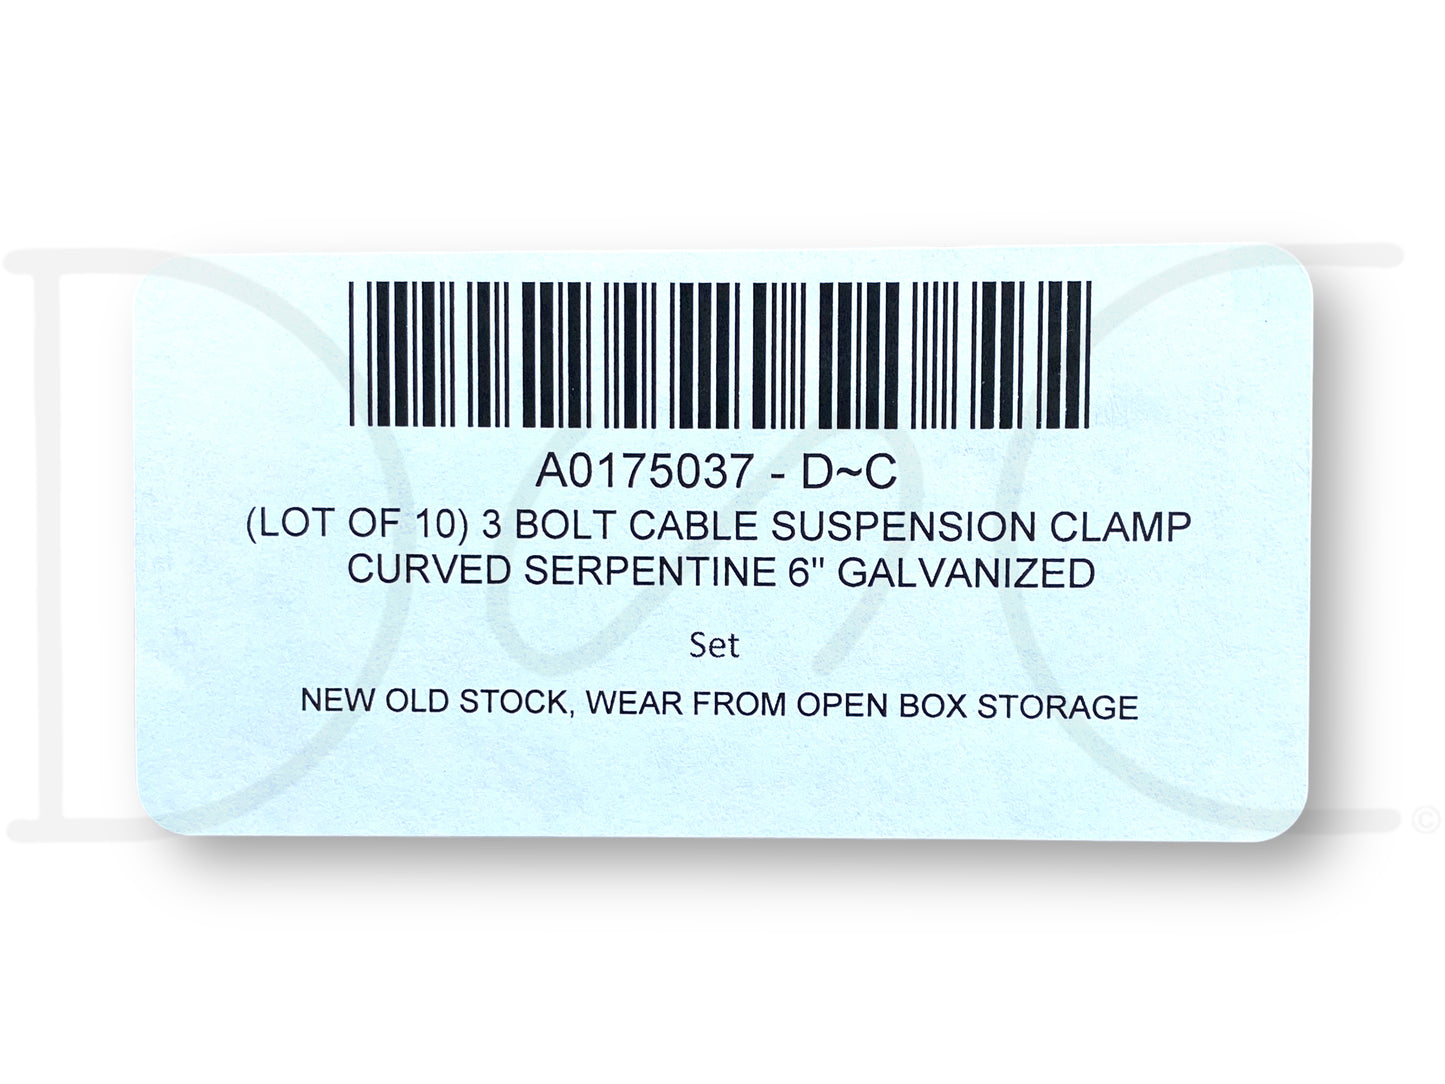 (Lot Of 10) 3 Bolt Cable Suspension Clamp Curved Serpentine 6" Galvanized